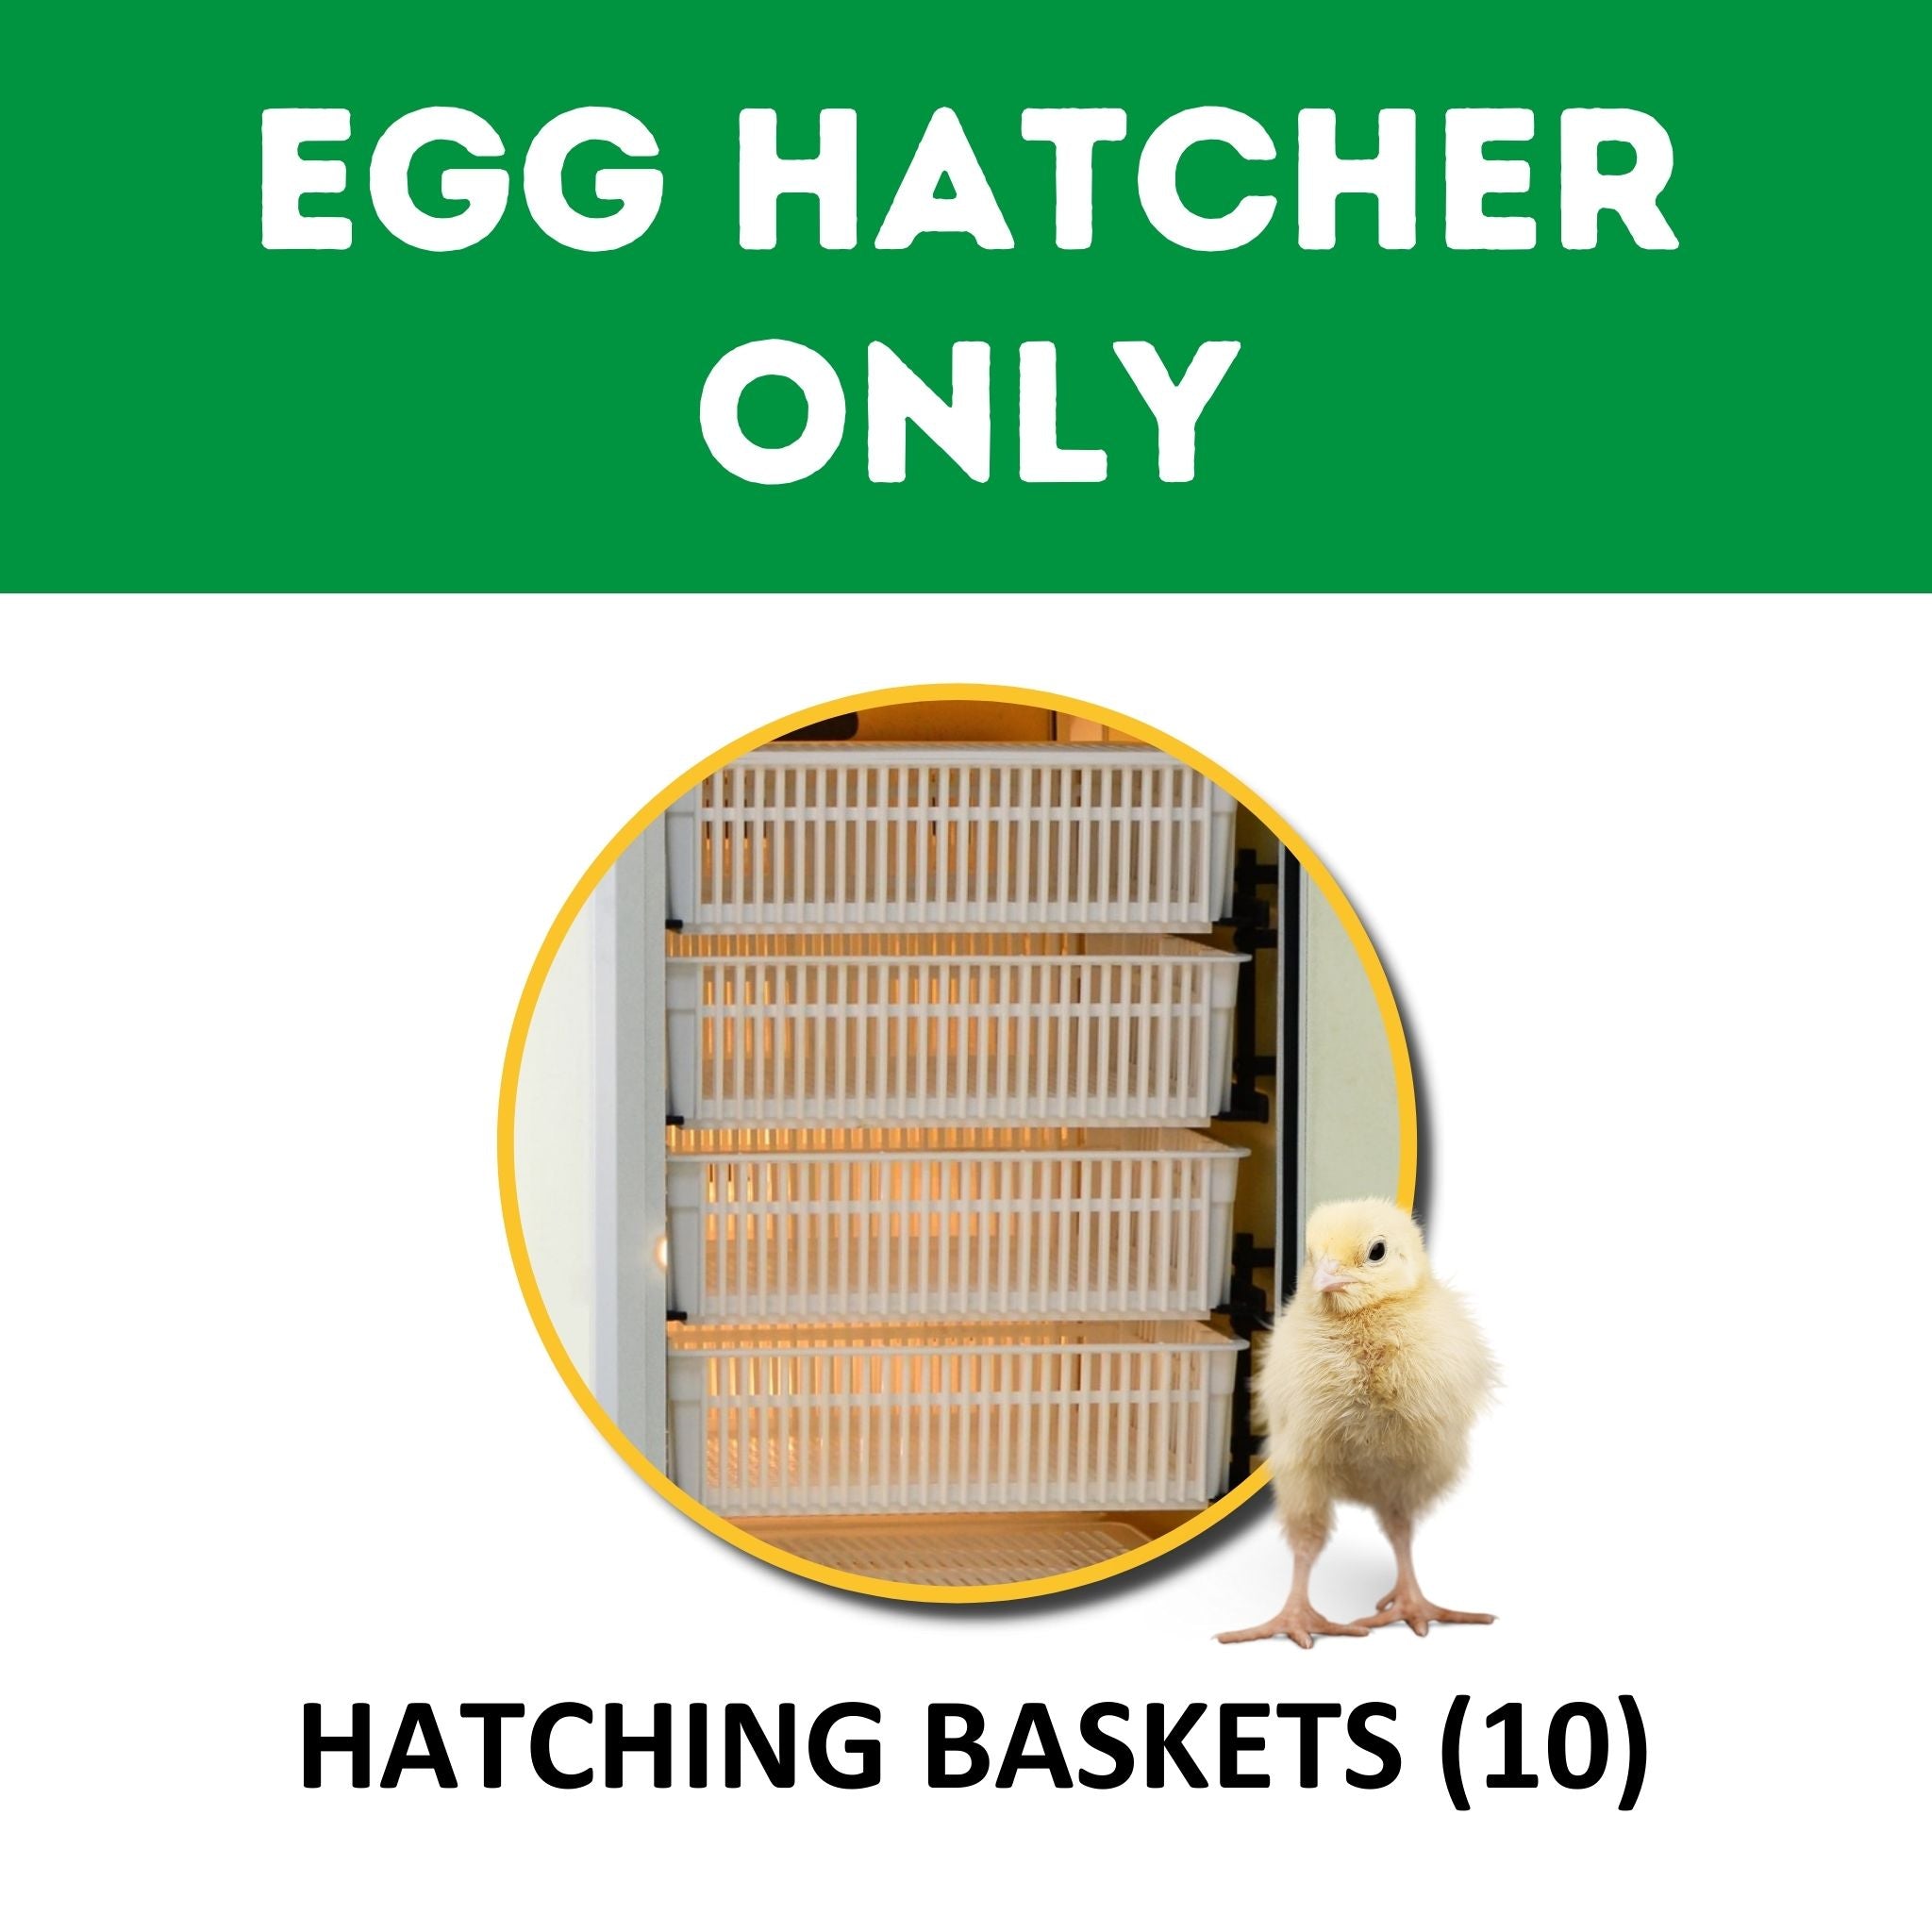 Hatching Time Cimuka. Image shows that incubator is hatcher only. Includes 10 hatching baskets, both seen in image.